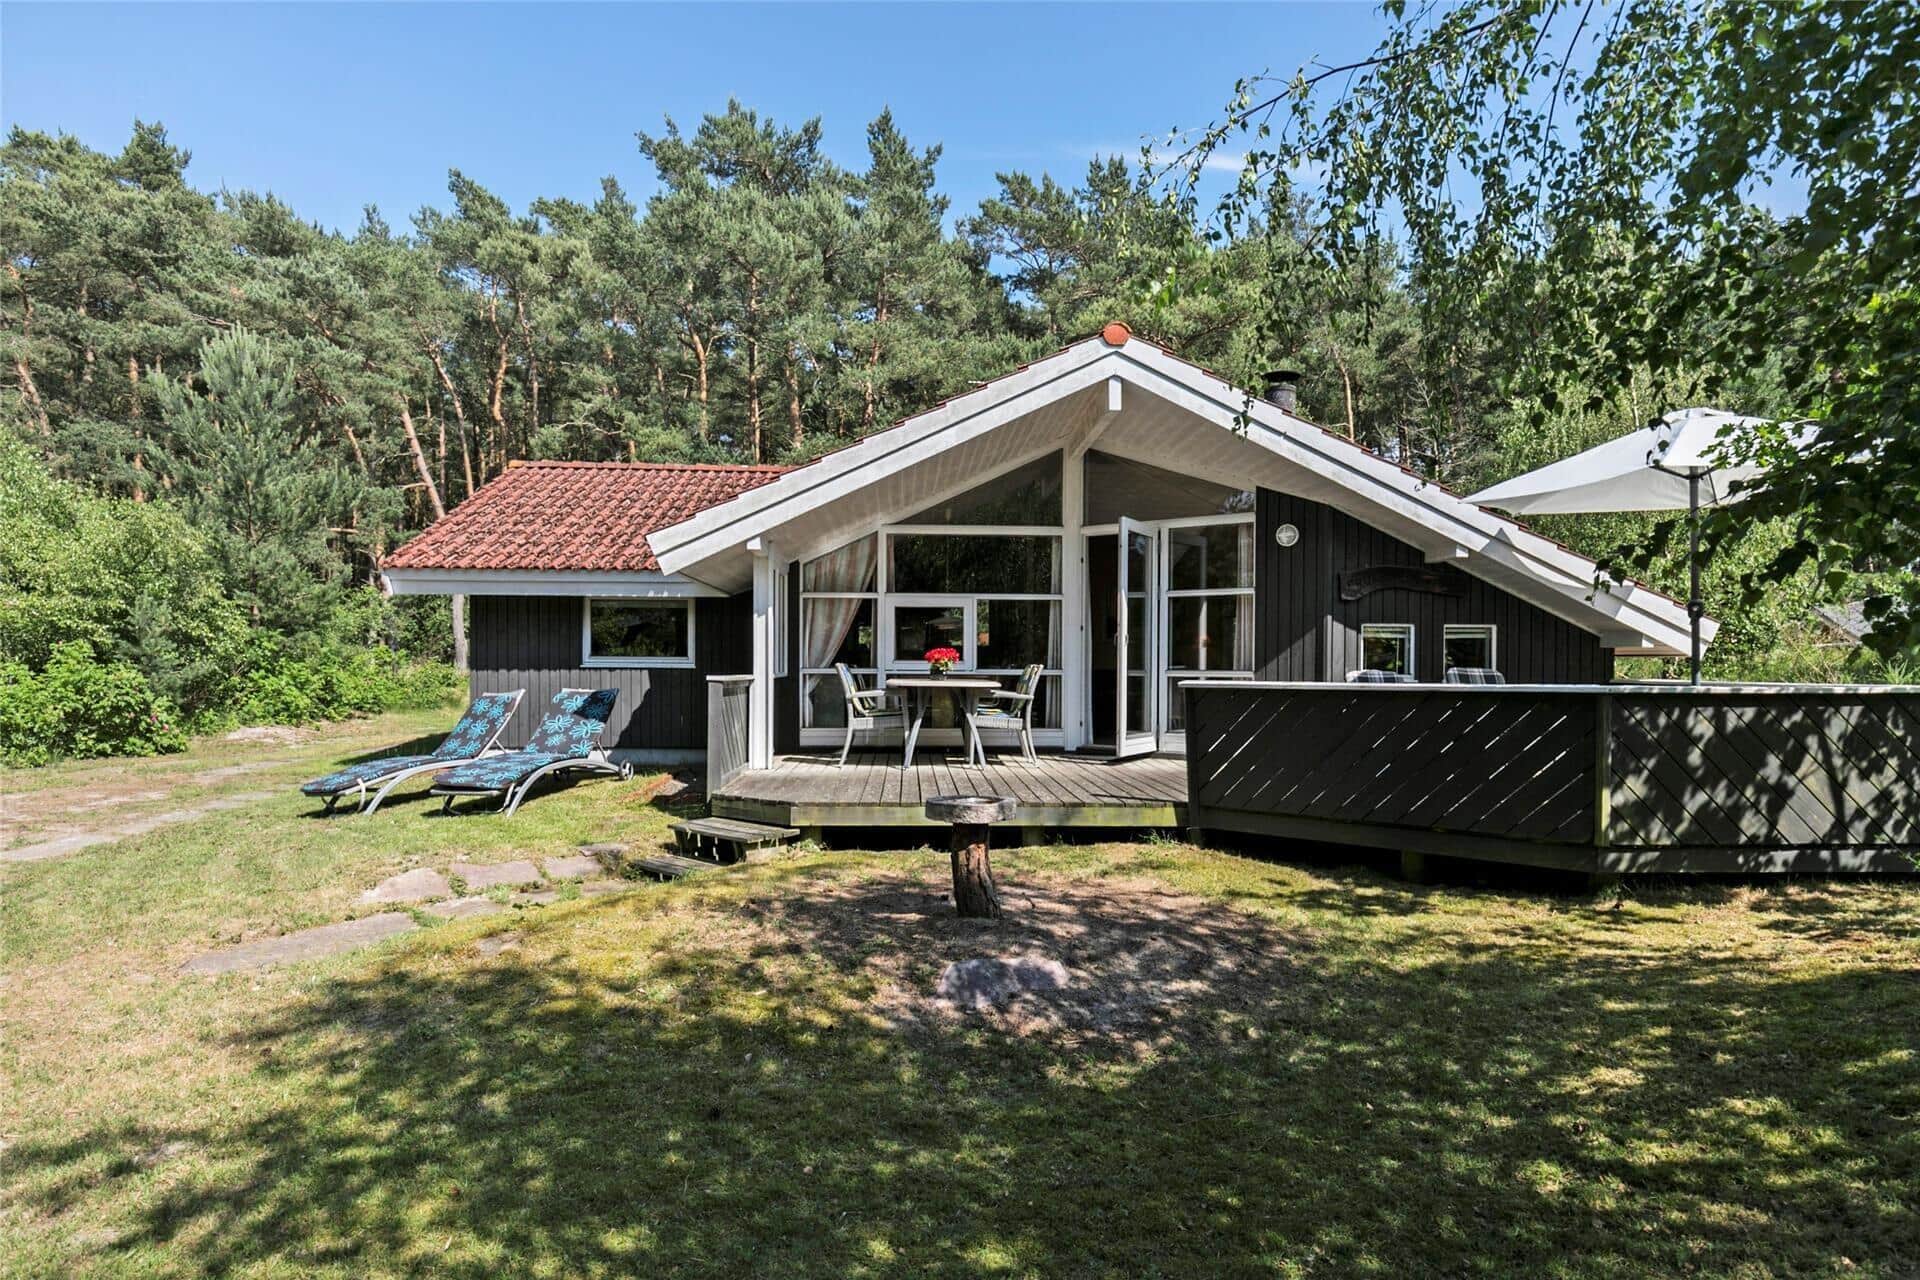 Image 0-10 Holiday-home 1597, Lyngvejen 28, DK - 3720 Aakirkeby